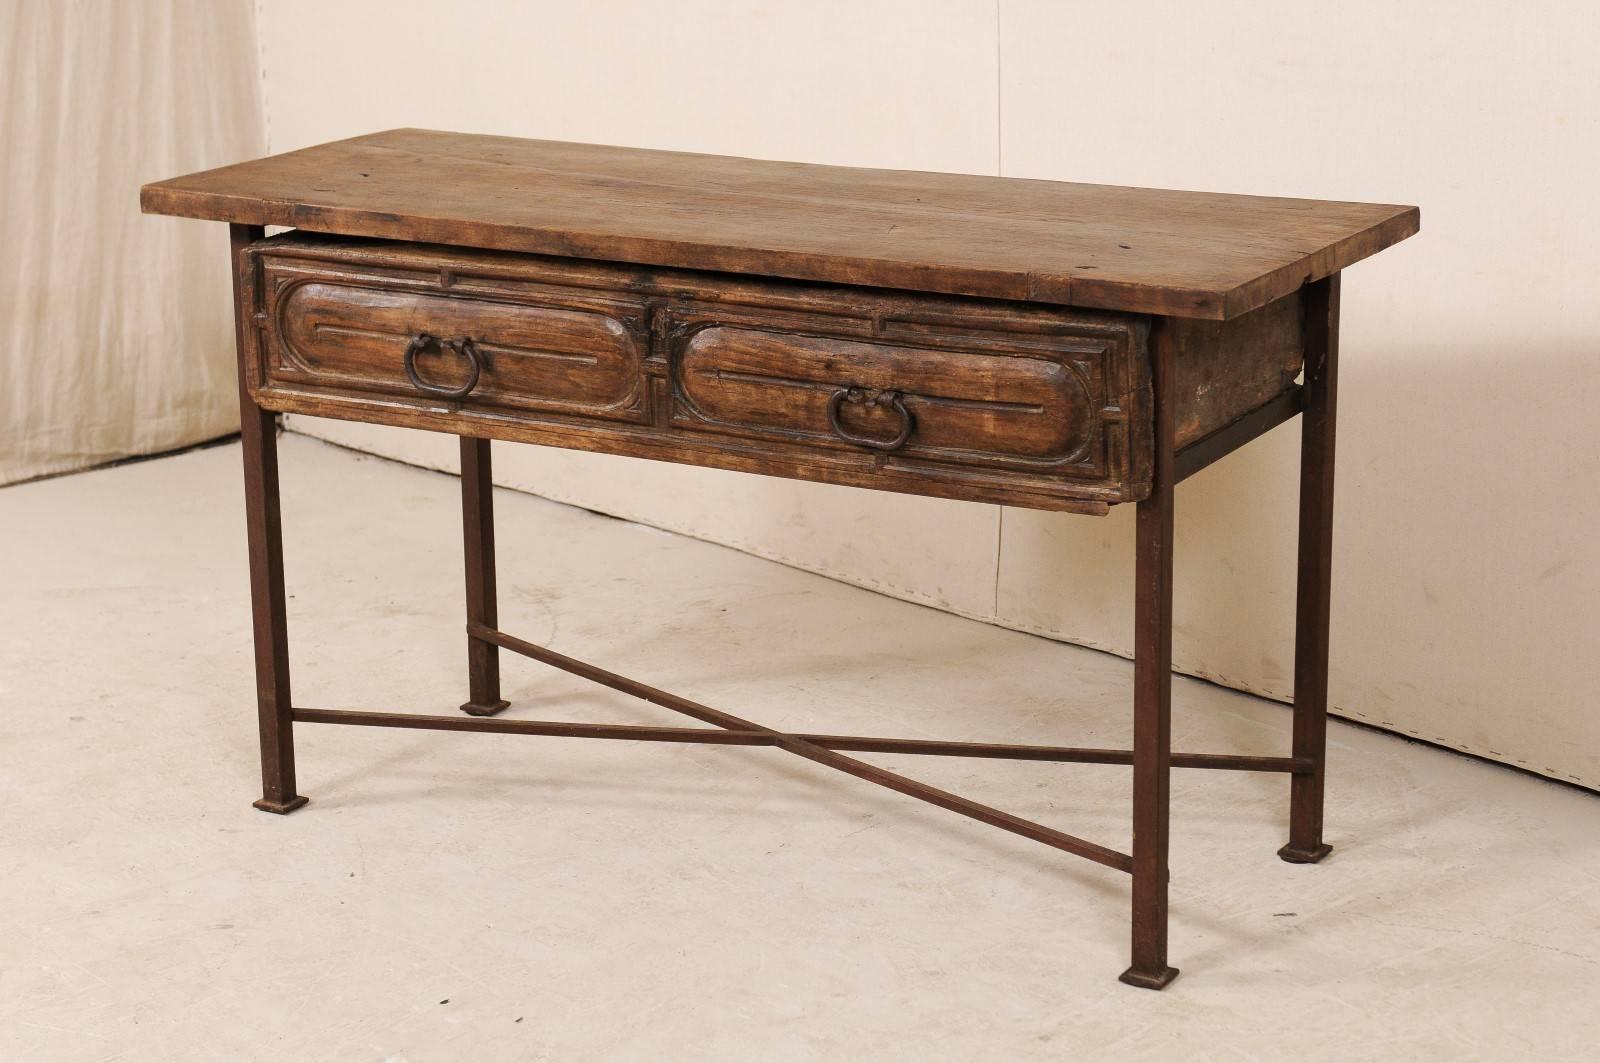 Rustic 18th Century Exquisite Spanish Wood and Iron Console Table with Large Drawer